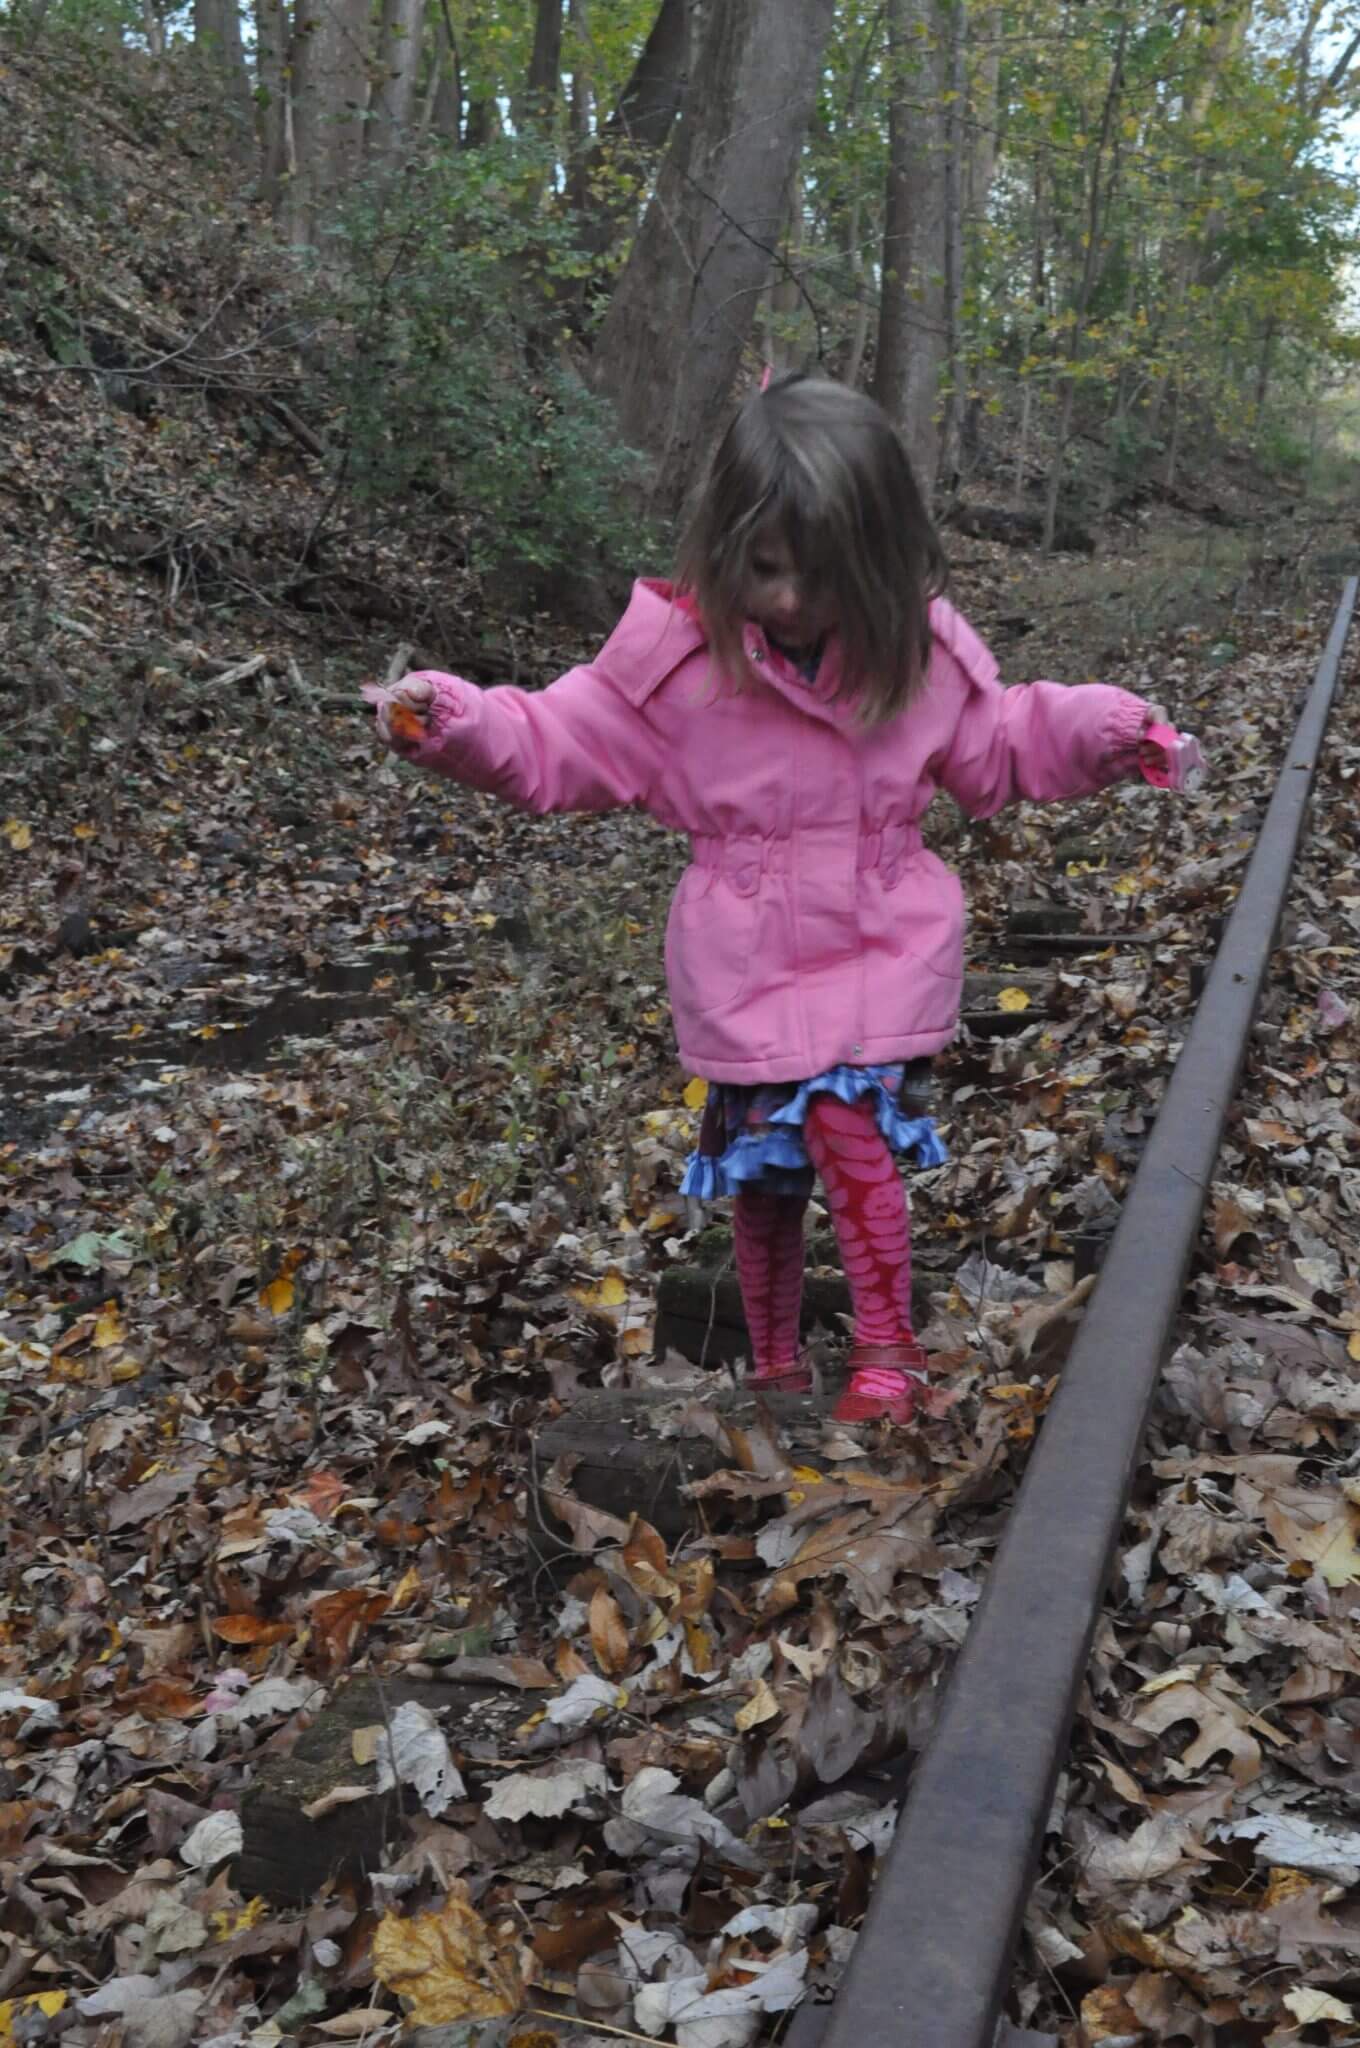 Hiking trail for kids in Maryland